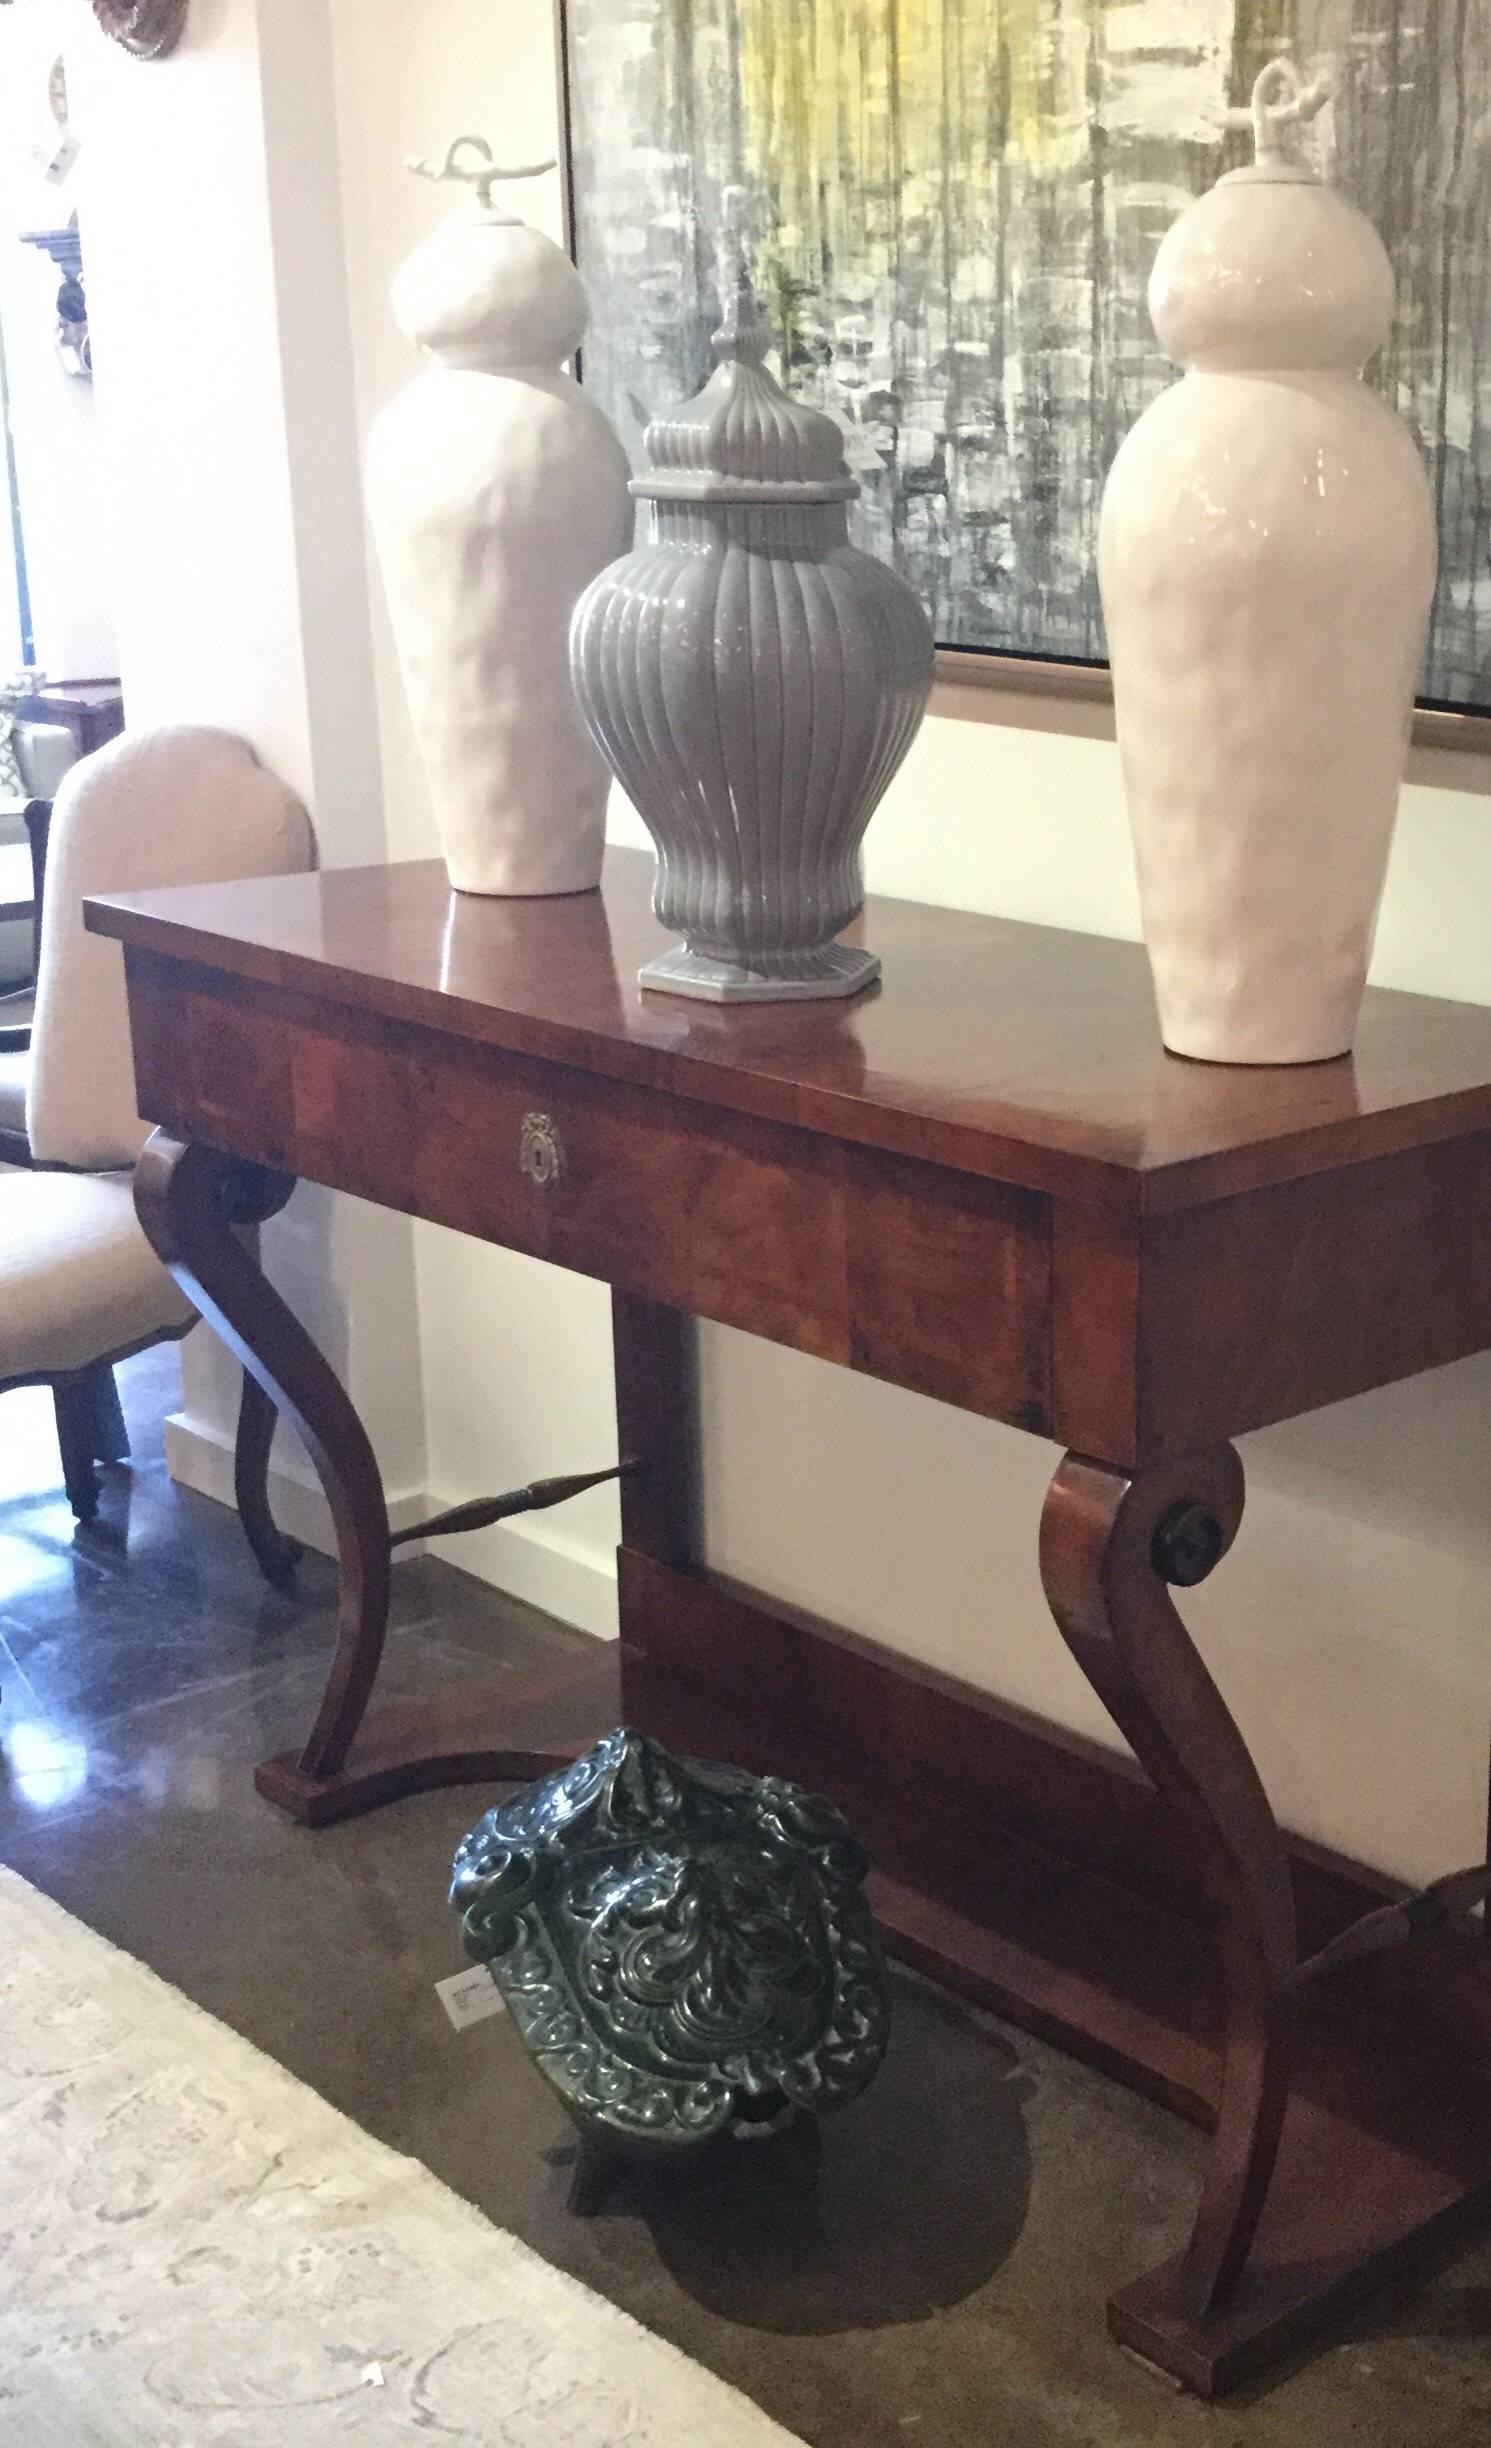 Empire-style, walnut inlaid console table with curved legs and a single drop front drawer accented with brass hardware, Italy.